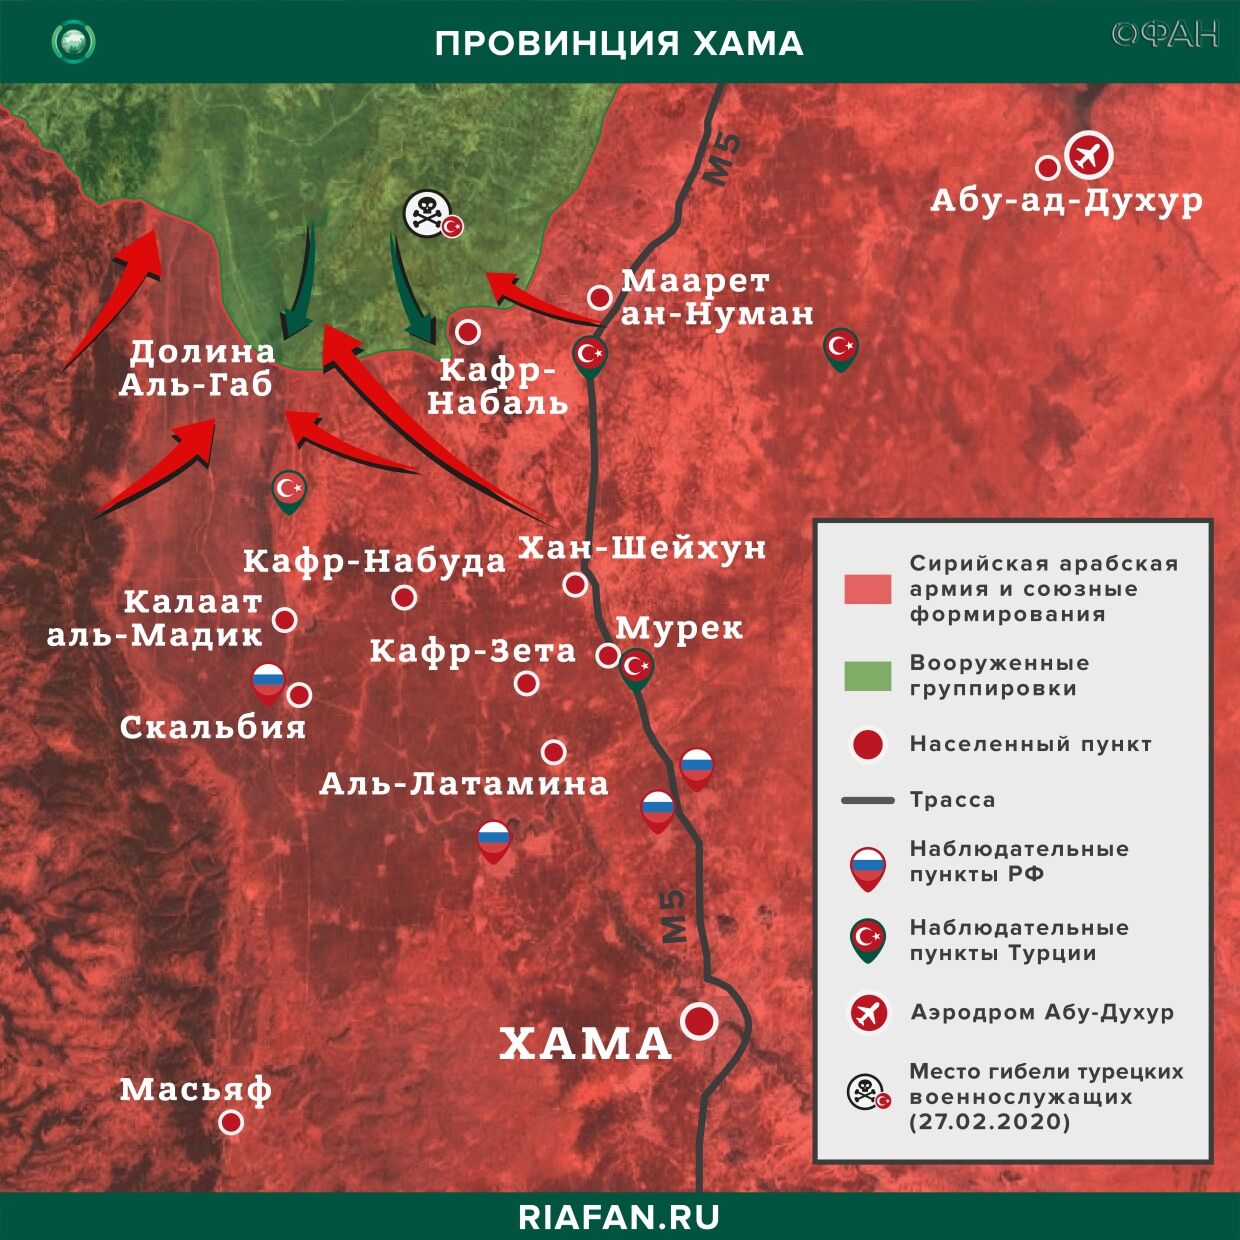 Syria news 10 Martha 22.30: Russian Defense Ministry denied the information about the losses CAA in Idlib, HTSH terrorists attacked army positions in Hama